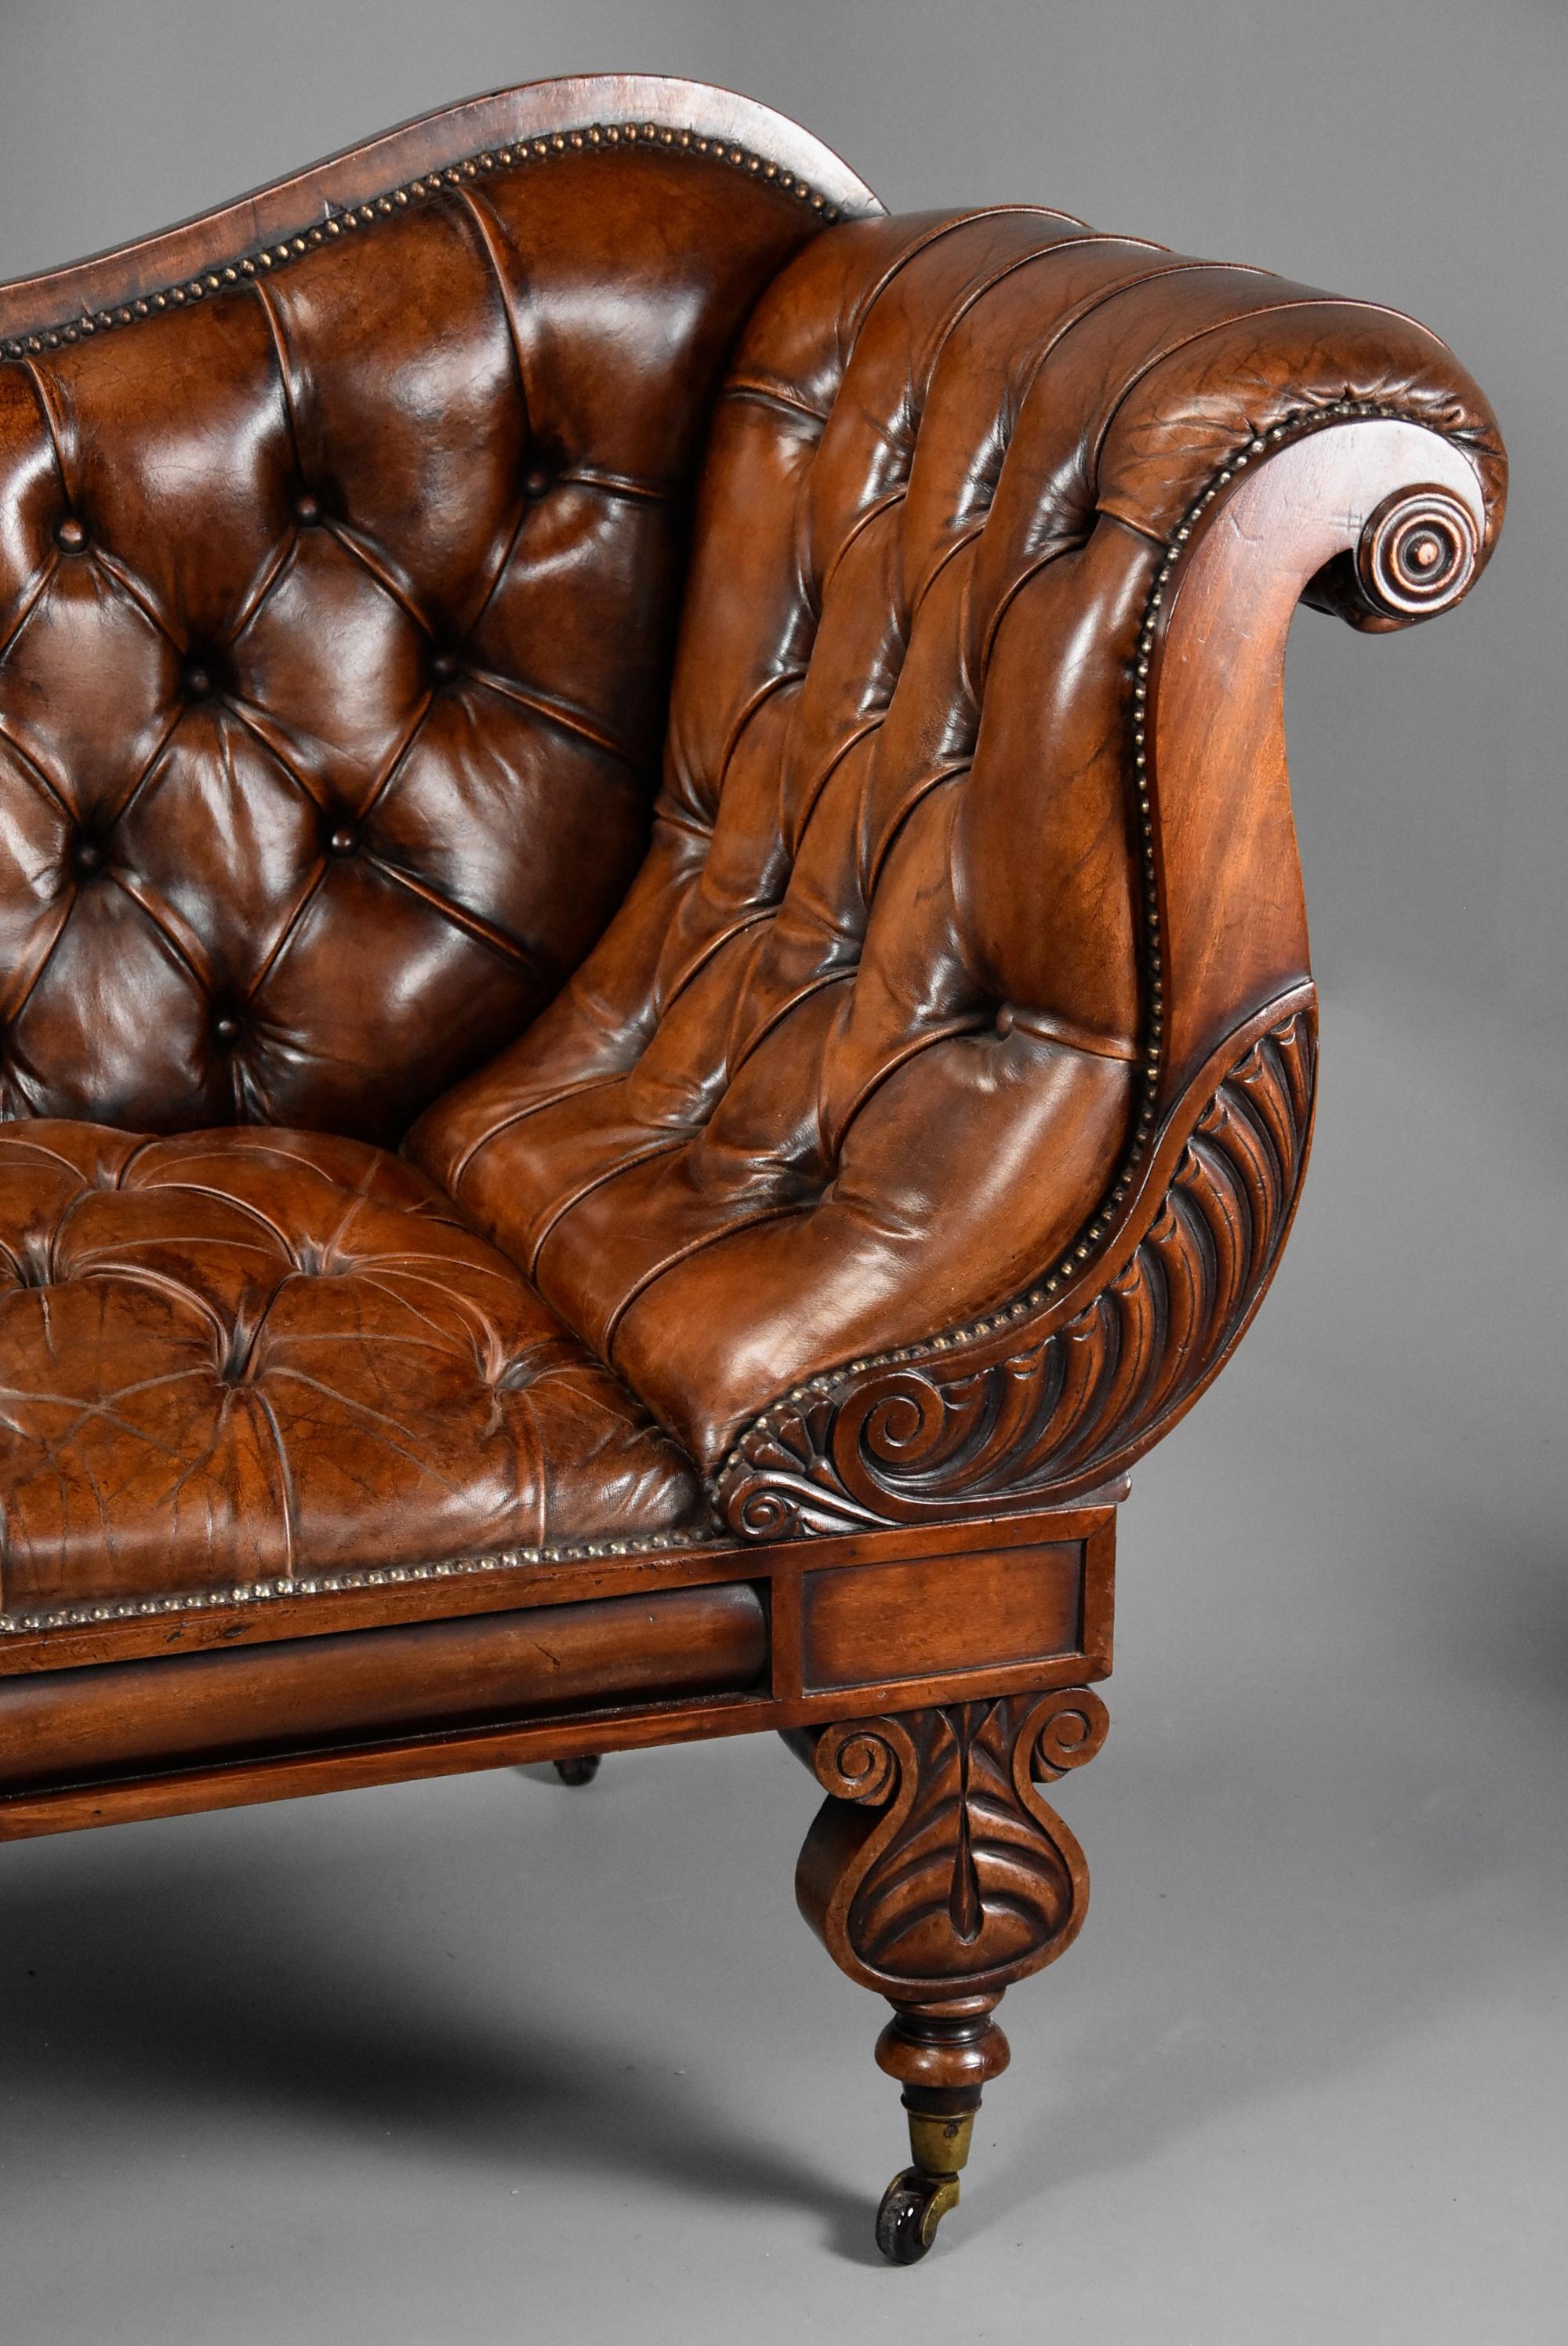 Superb Late Regency/William IV Mahogany Deep Buttoned Brown Leather Sofa For Sale 2